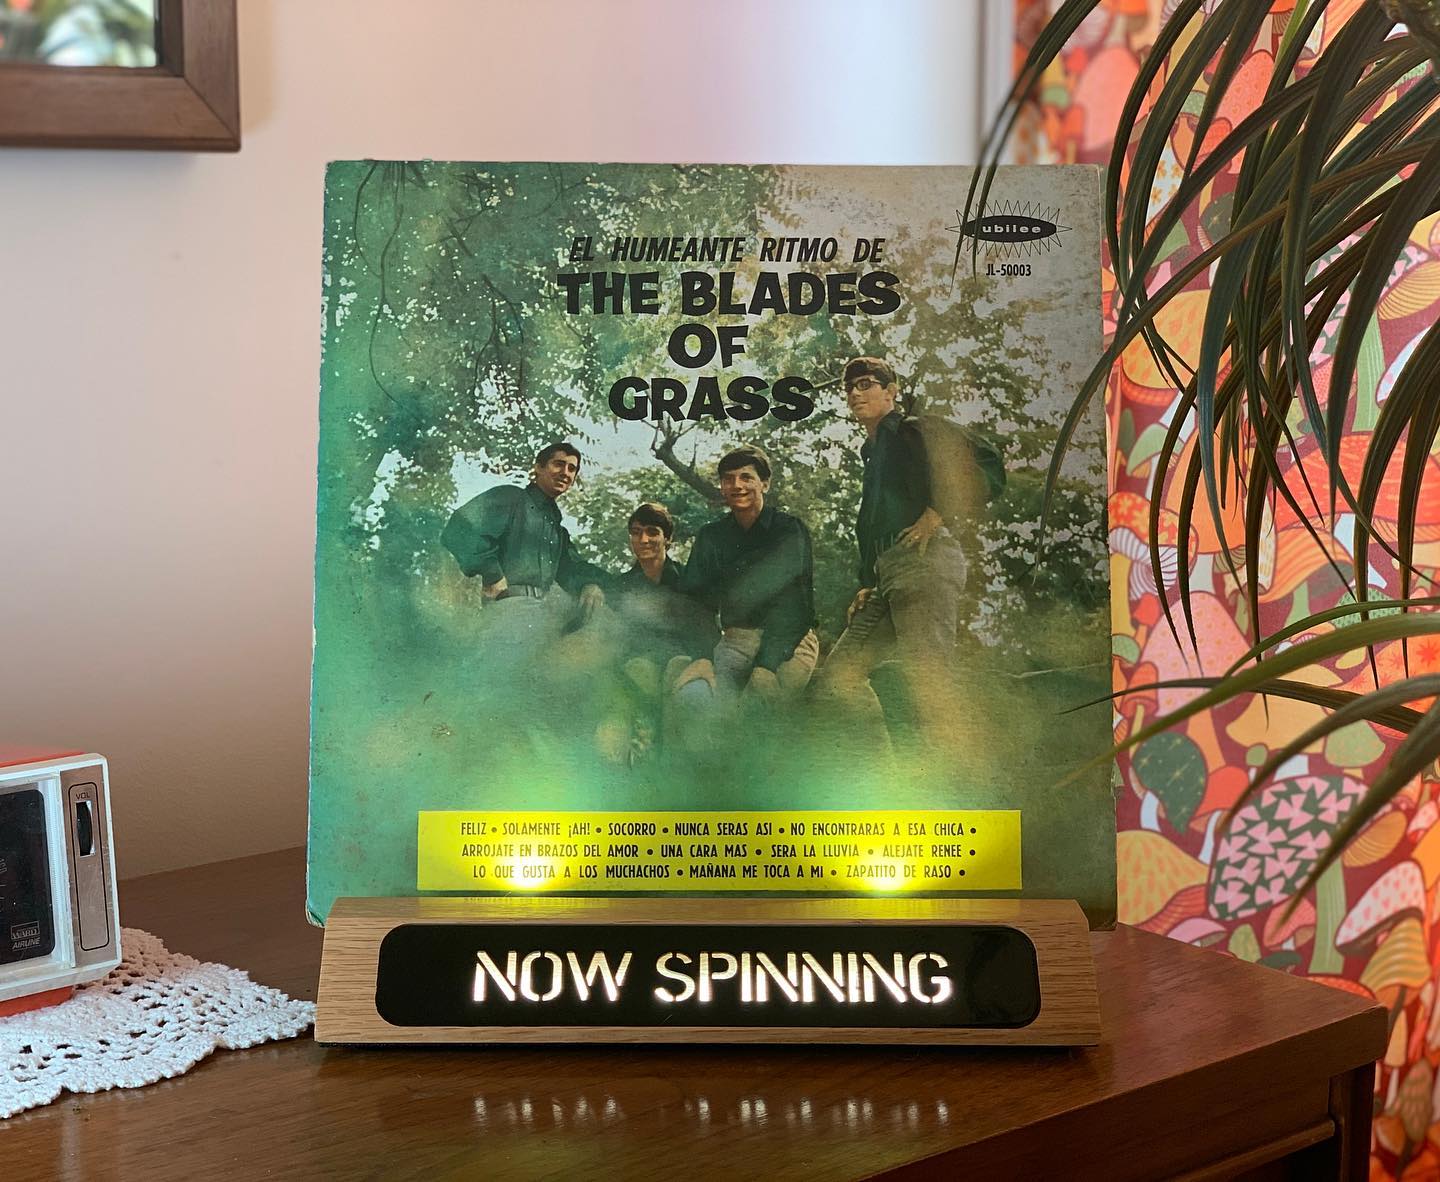 Vinyl-a-Day 48: The Blades of Grass - “The Blades of Grass Are Not for Smoking” (Jubilee, 1967)